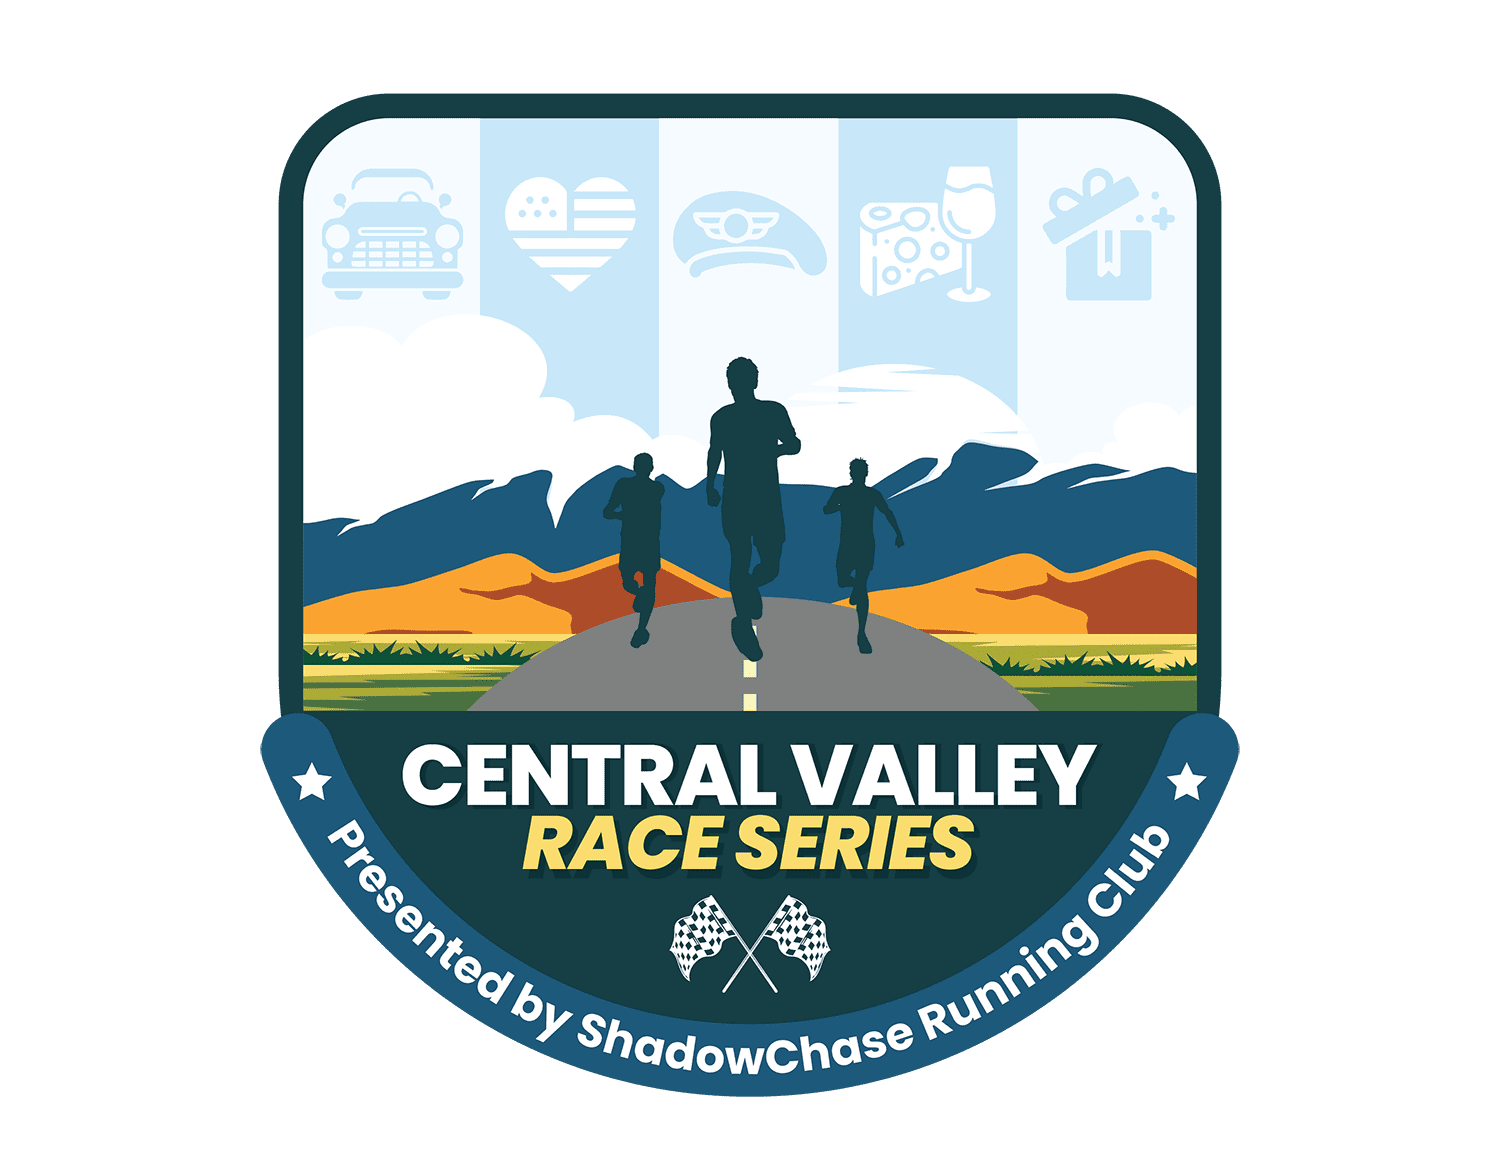 Central Valley Race Series logo